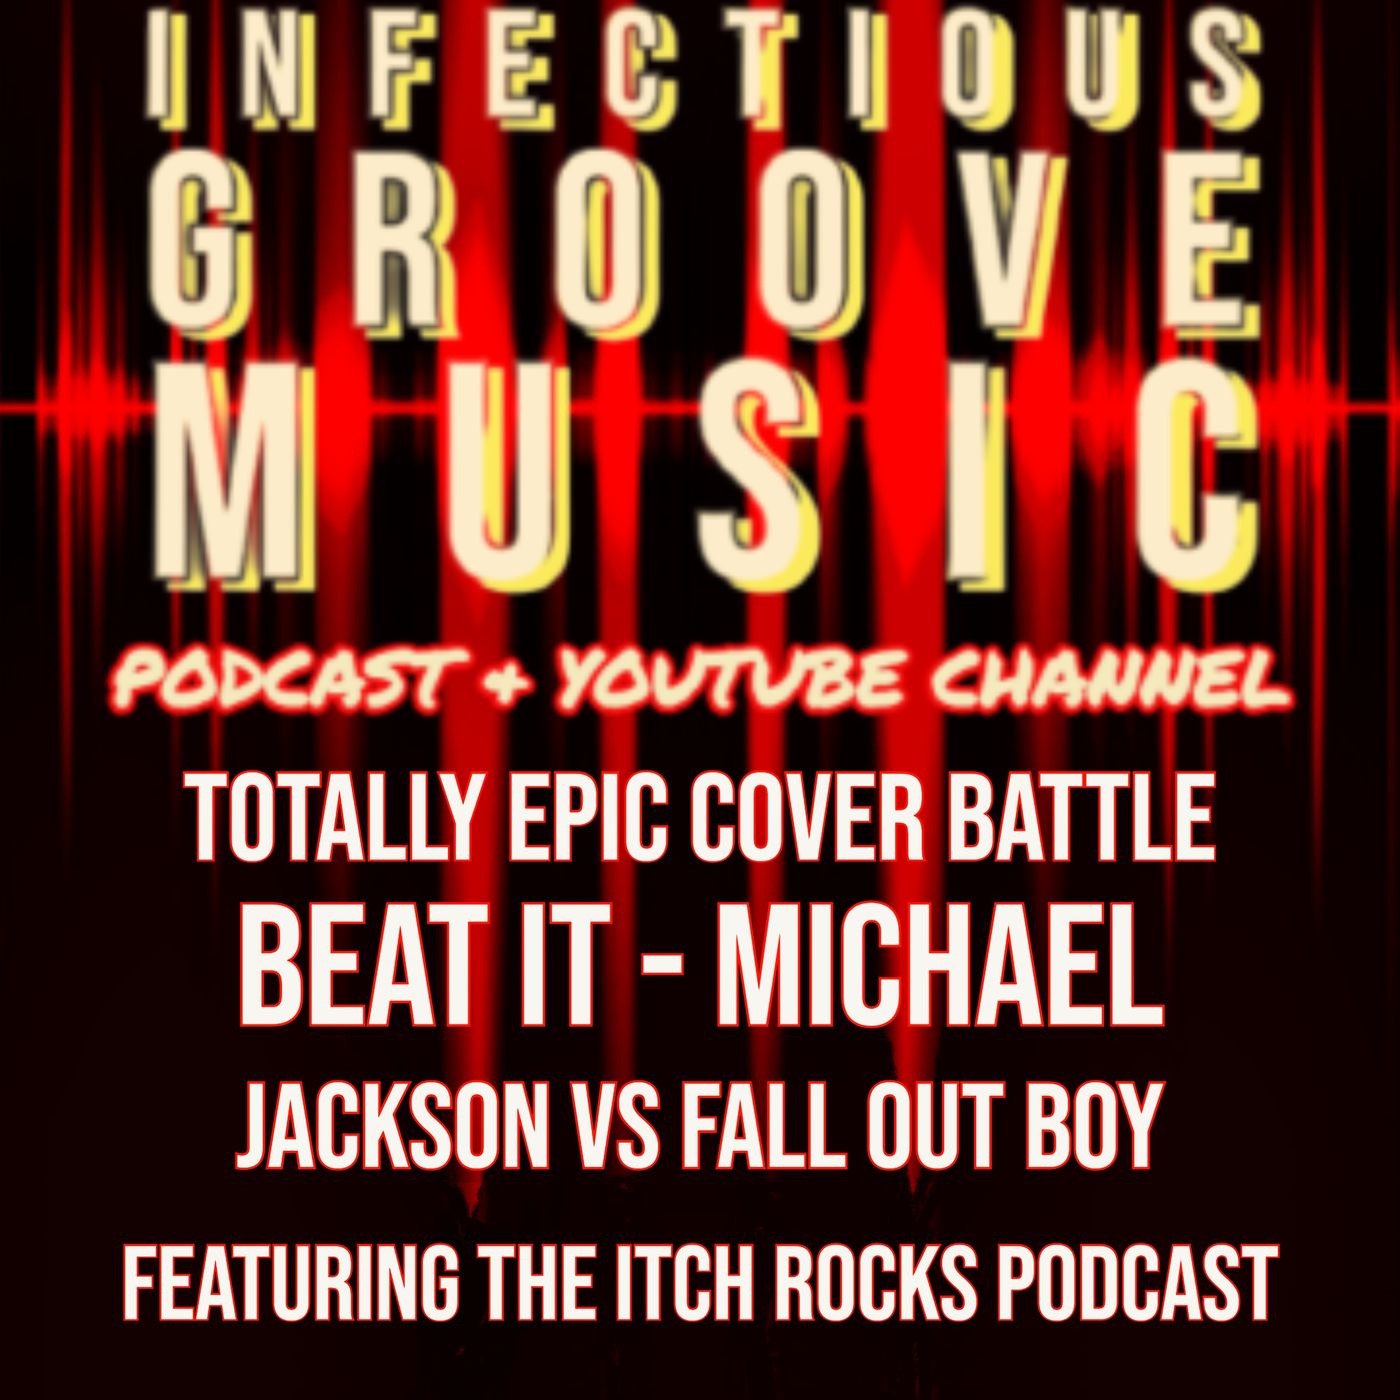 IGP Presents A Totally Epic Cover Battle - Michael Jackson Vs Fall Out Boy - Beat It